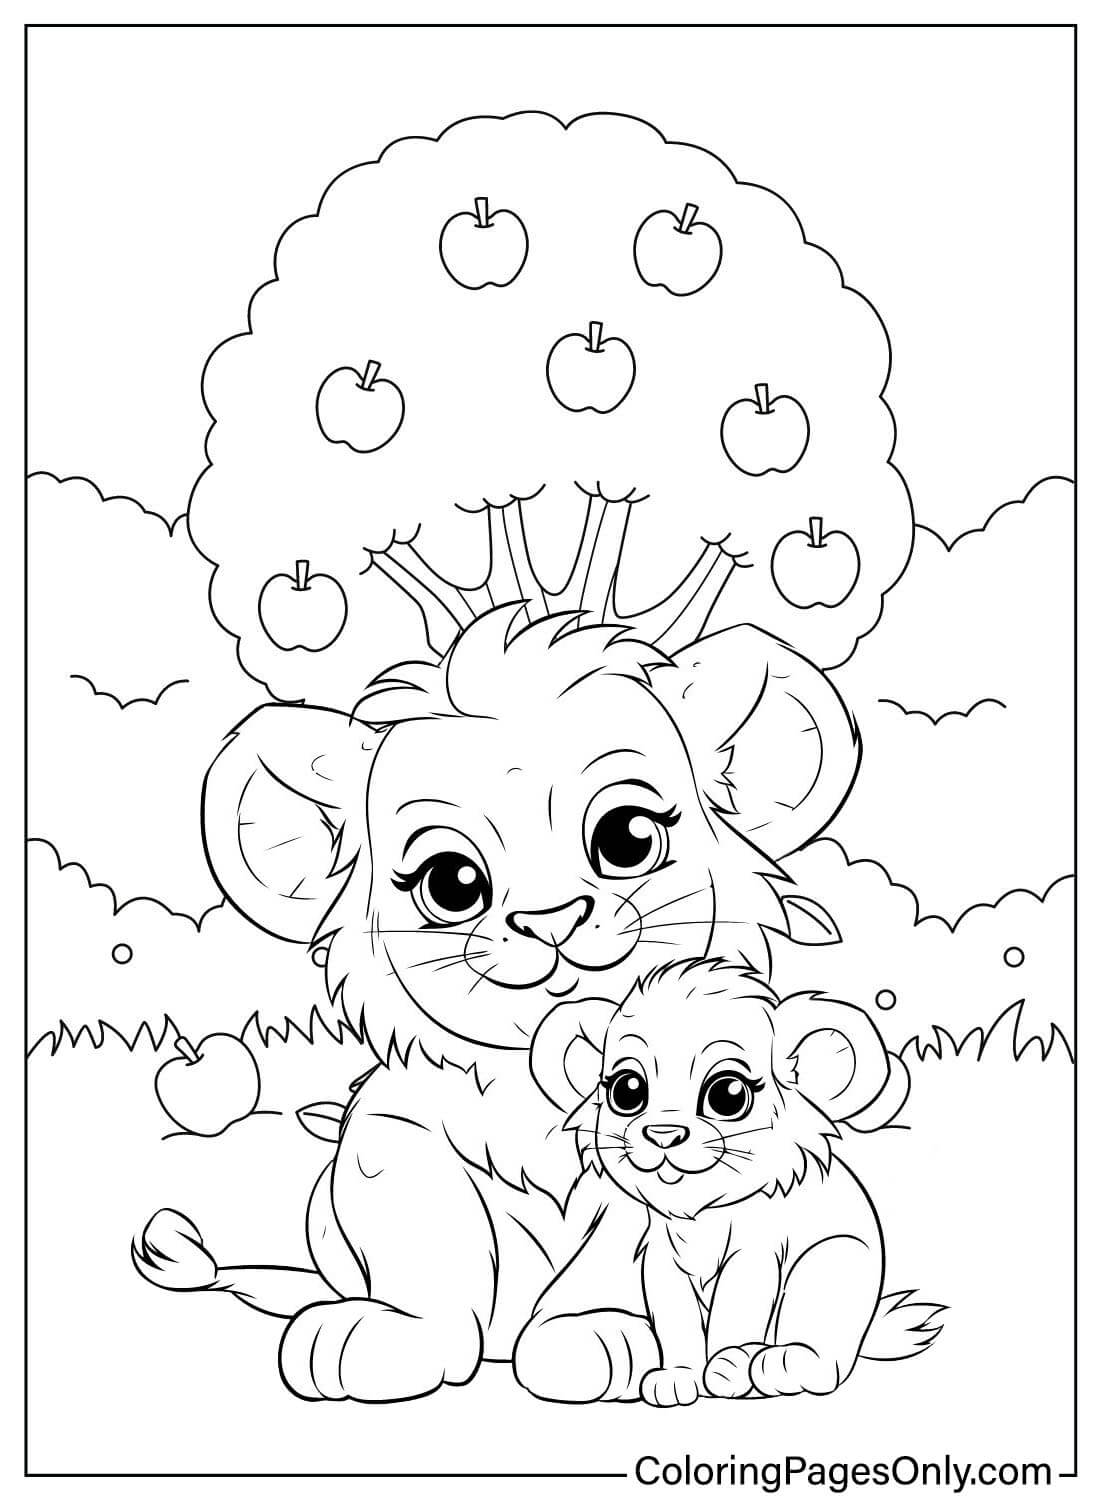 Lions Coloring Page from Lion